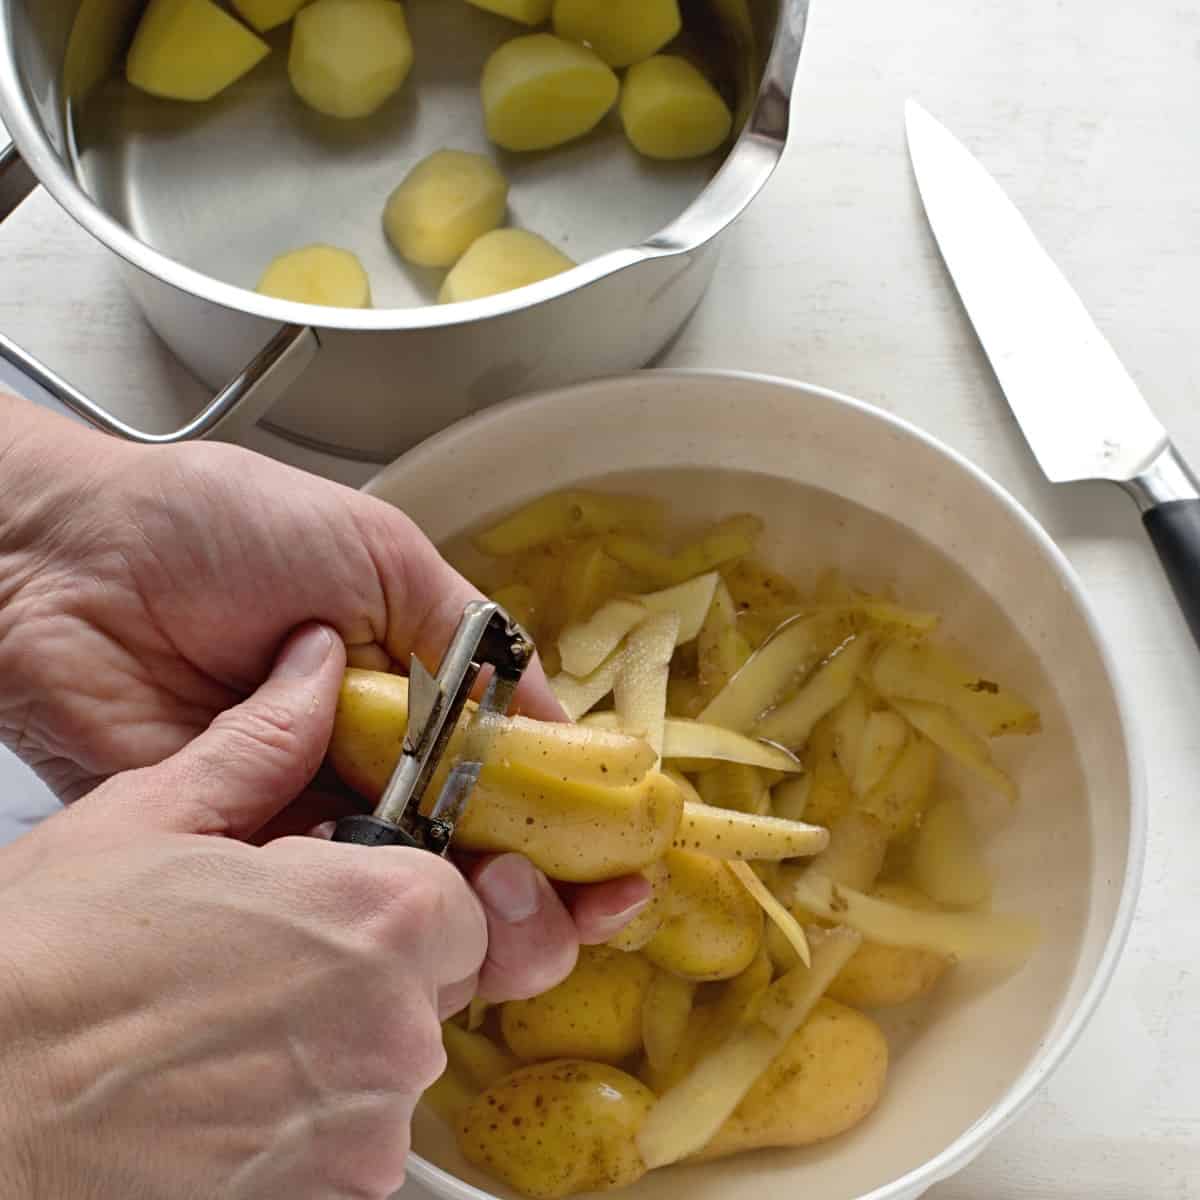 Peeling potatoes and cutting them into pieces.